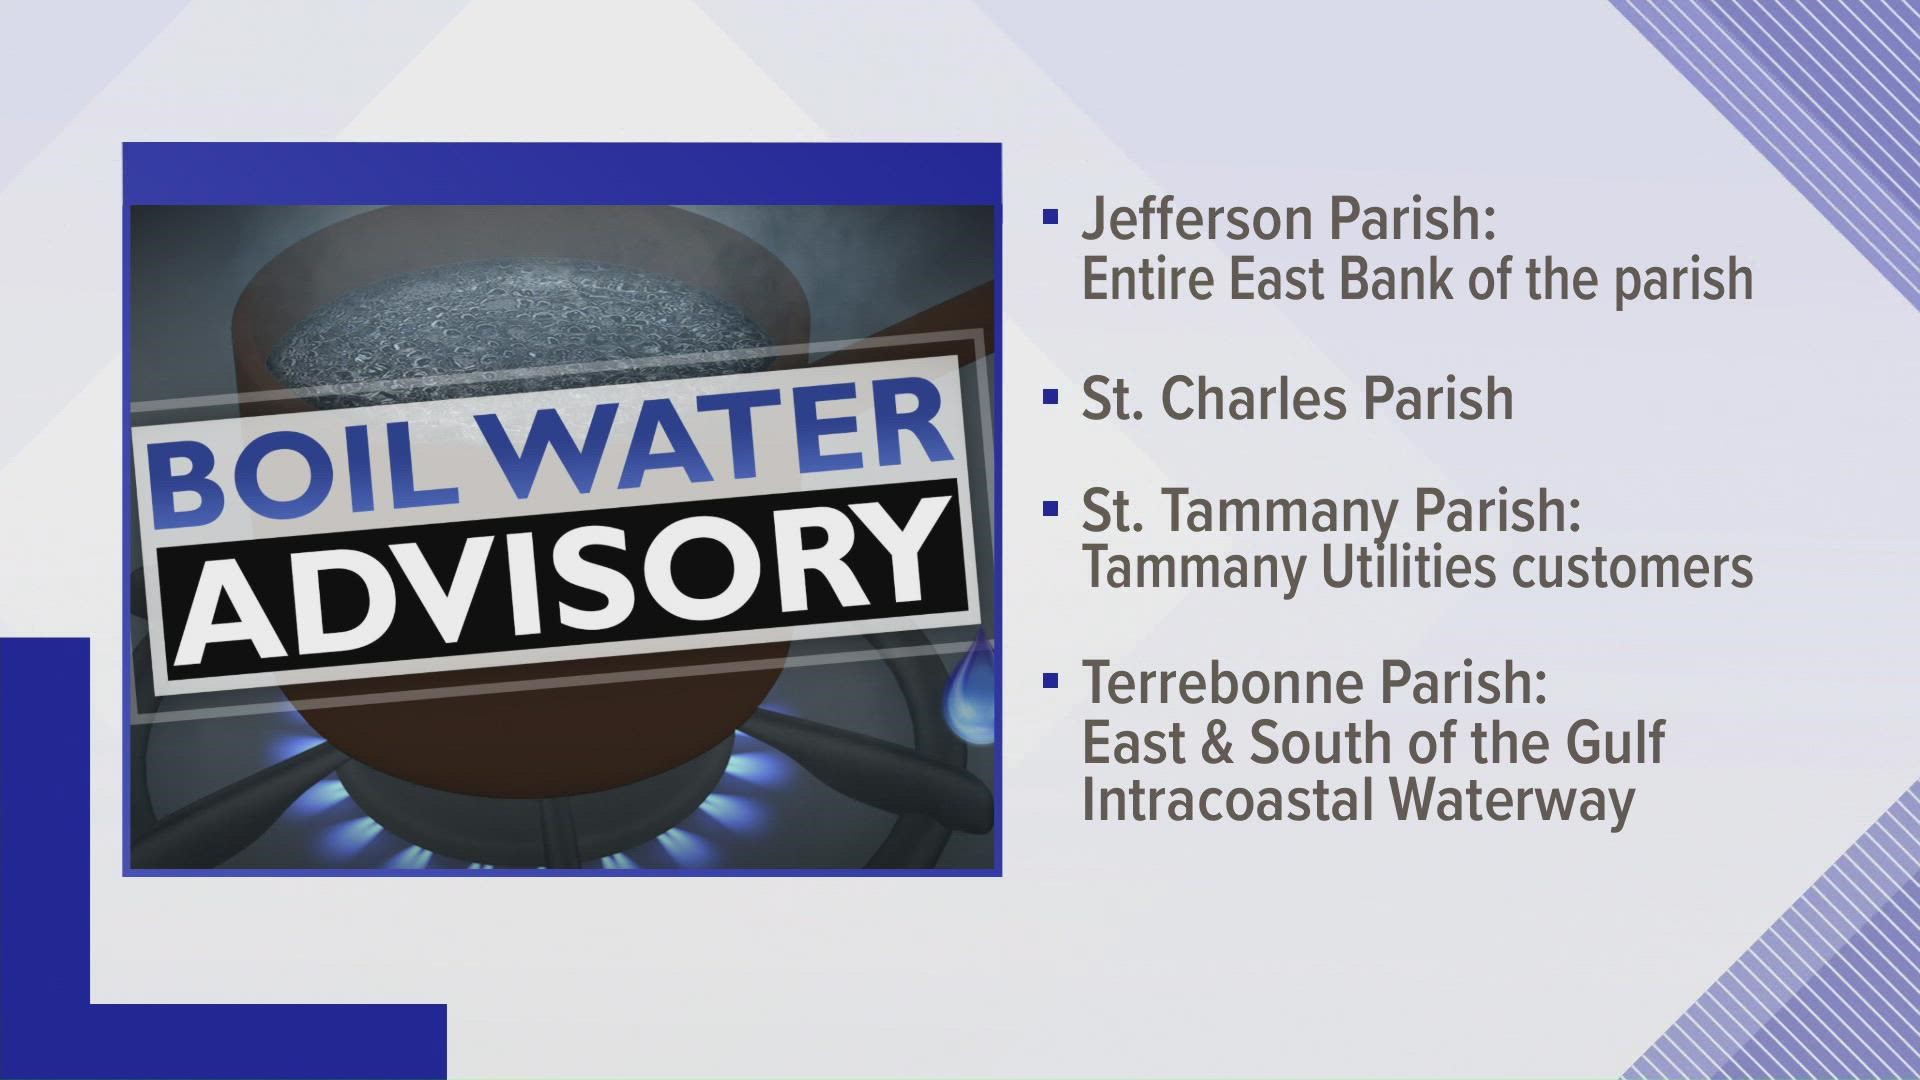 The Eastbank of Jefferson Parish is being asked to boil their water due to a loss of pressure and more than 200 people are stranded in Lafitte.